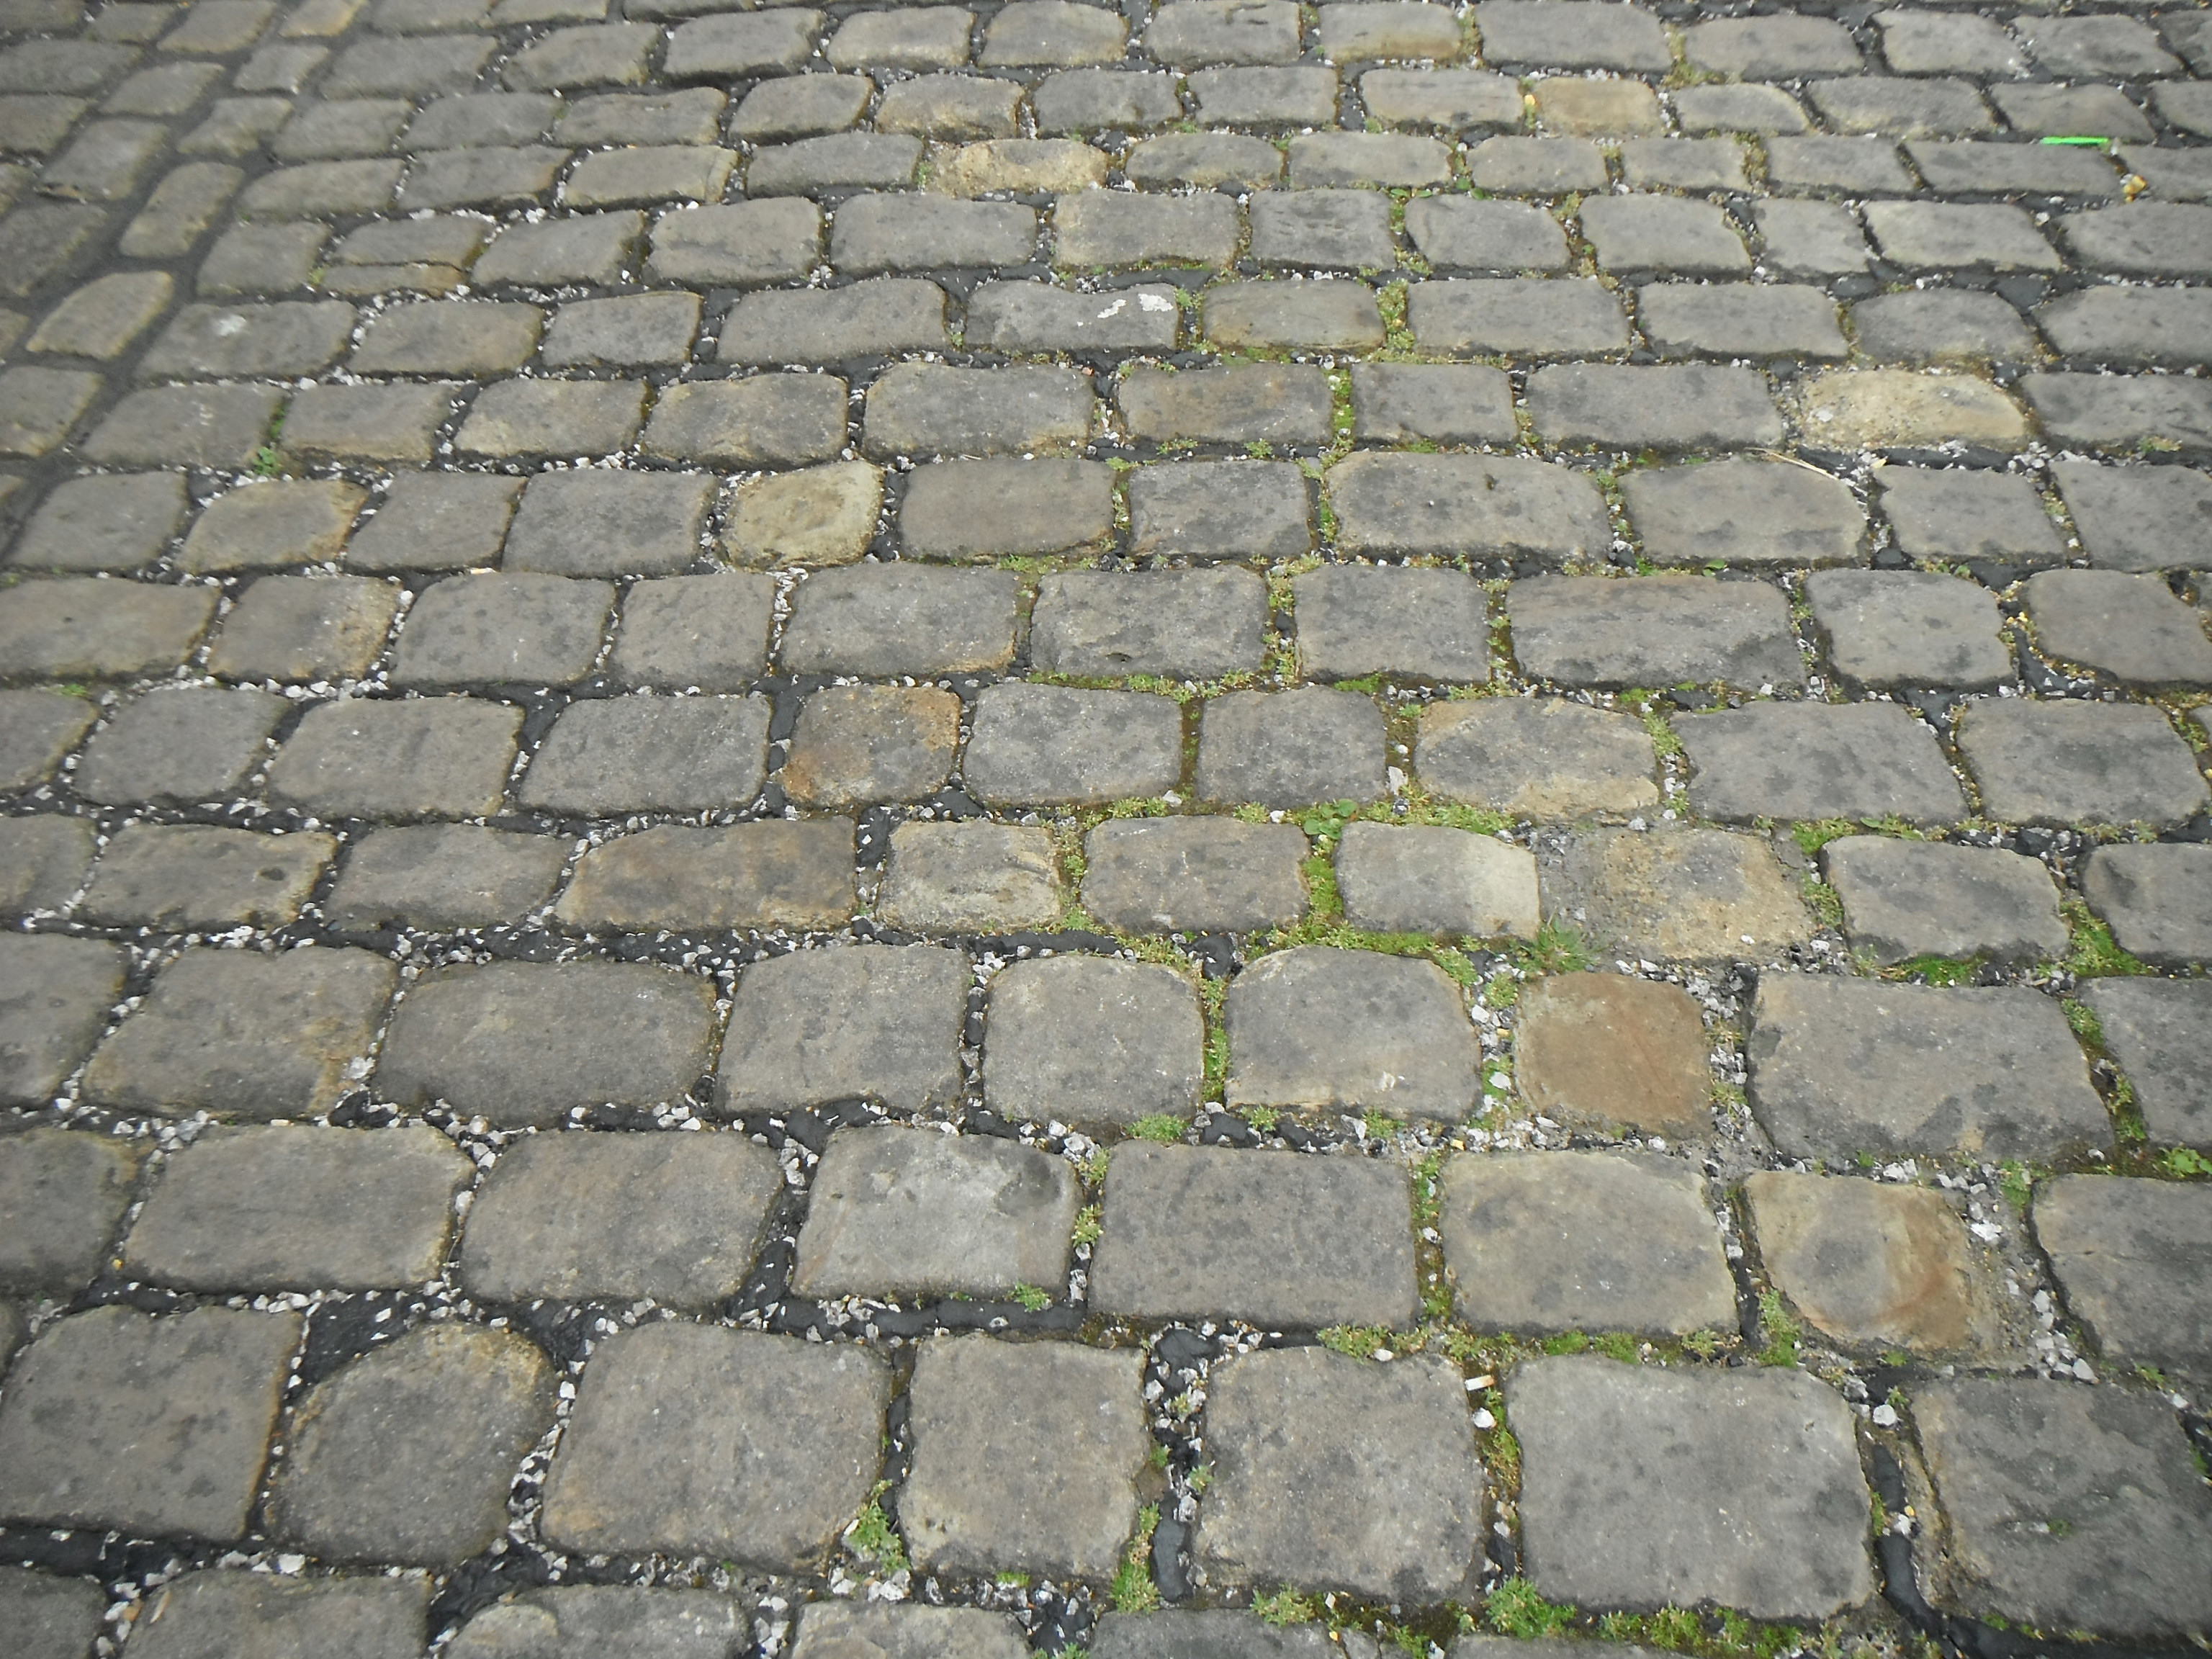 photo taken by me – A steep cobbled street in the village of Barnoldswick